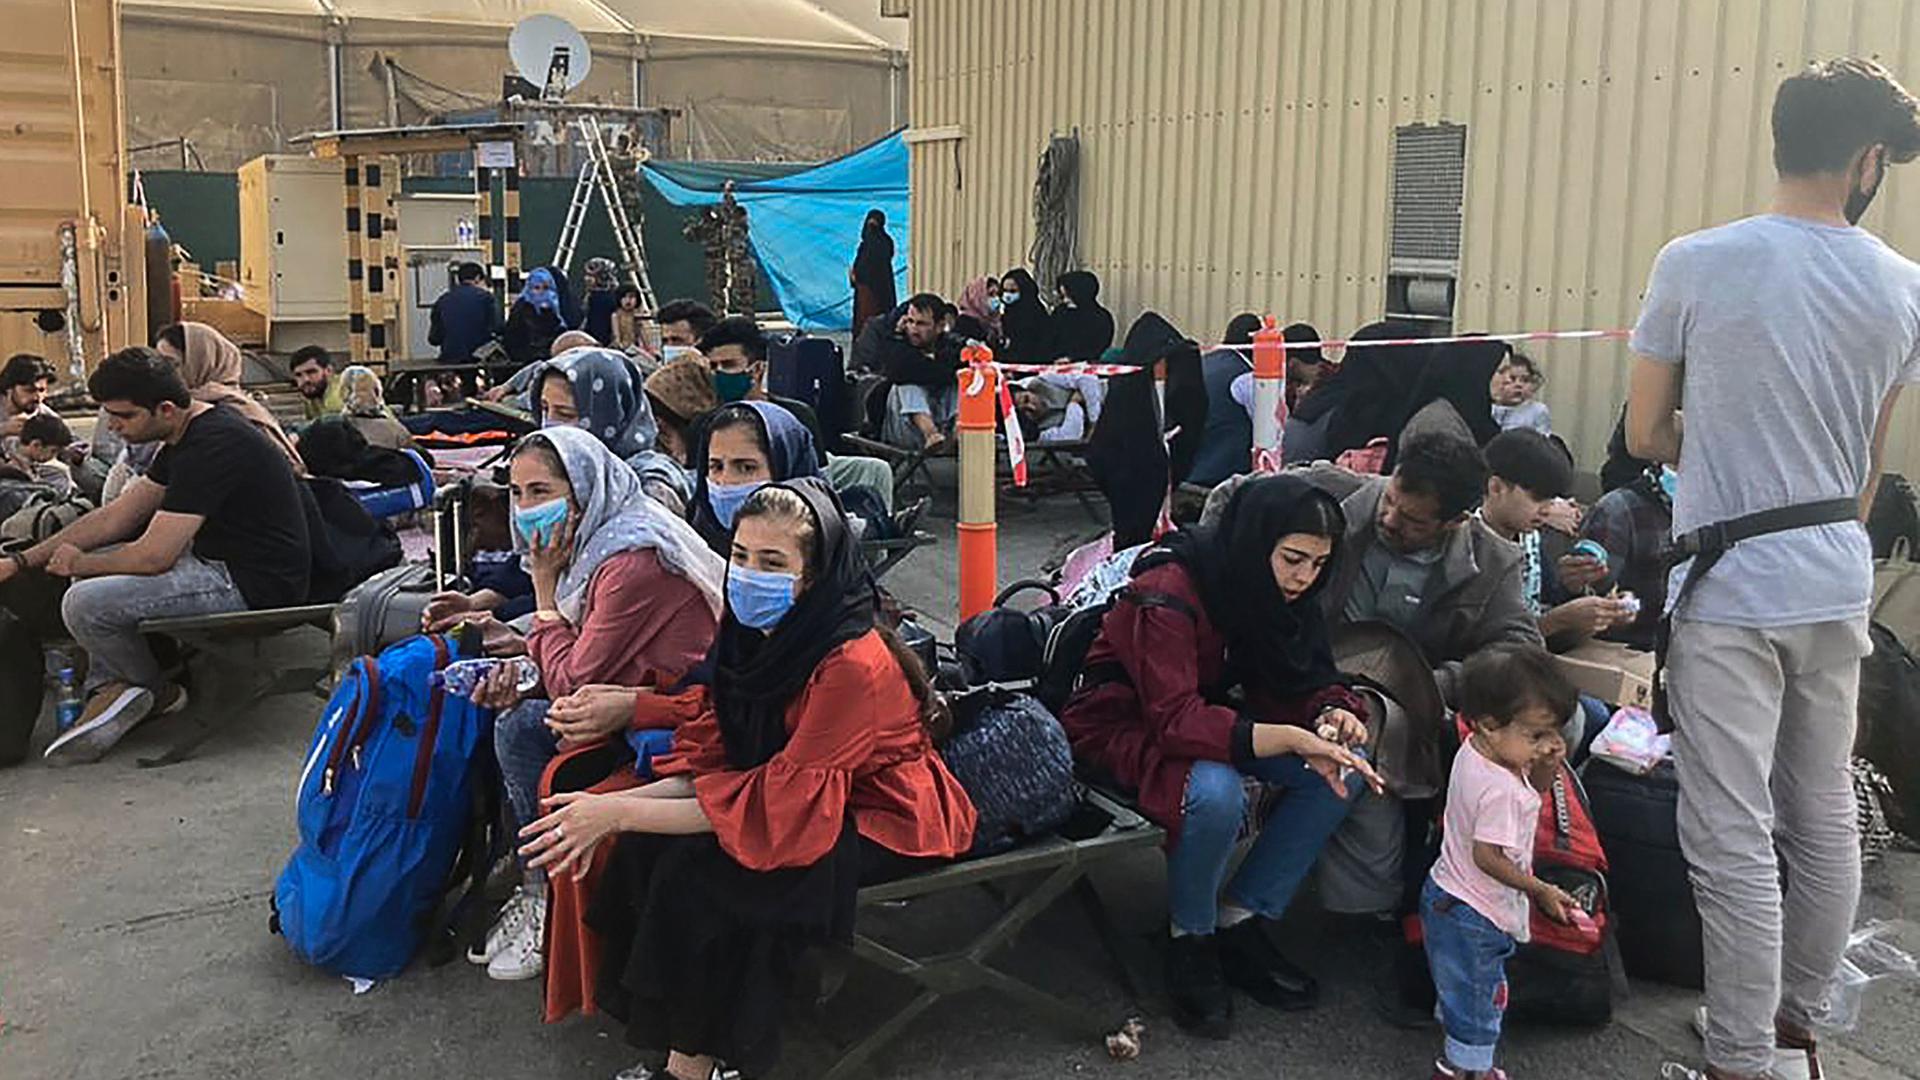 People wait to be evacuated from Afghanistan at the airport in Kabul on August 18, 2021 following the Taliban stunning takeover of the country. (Photo by - / AFP)